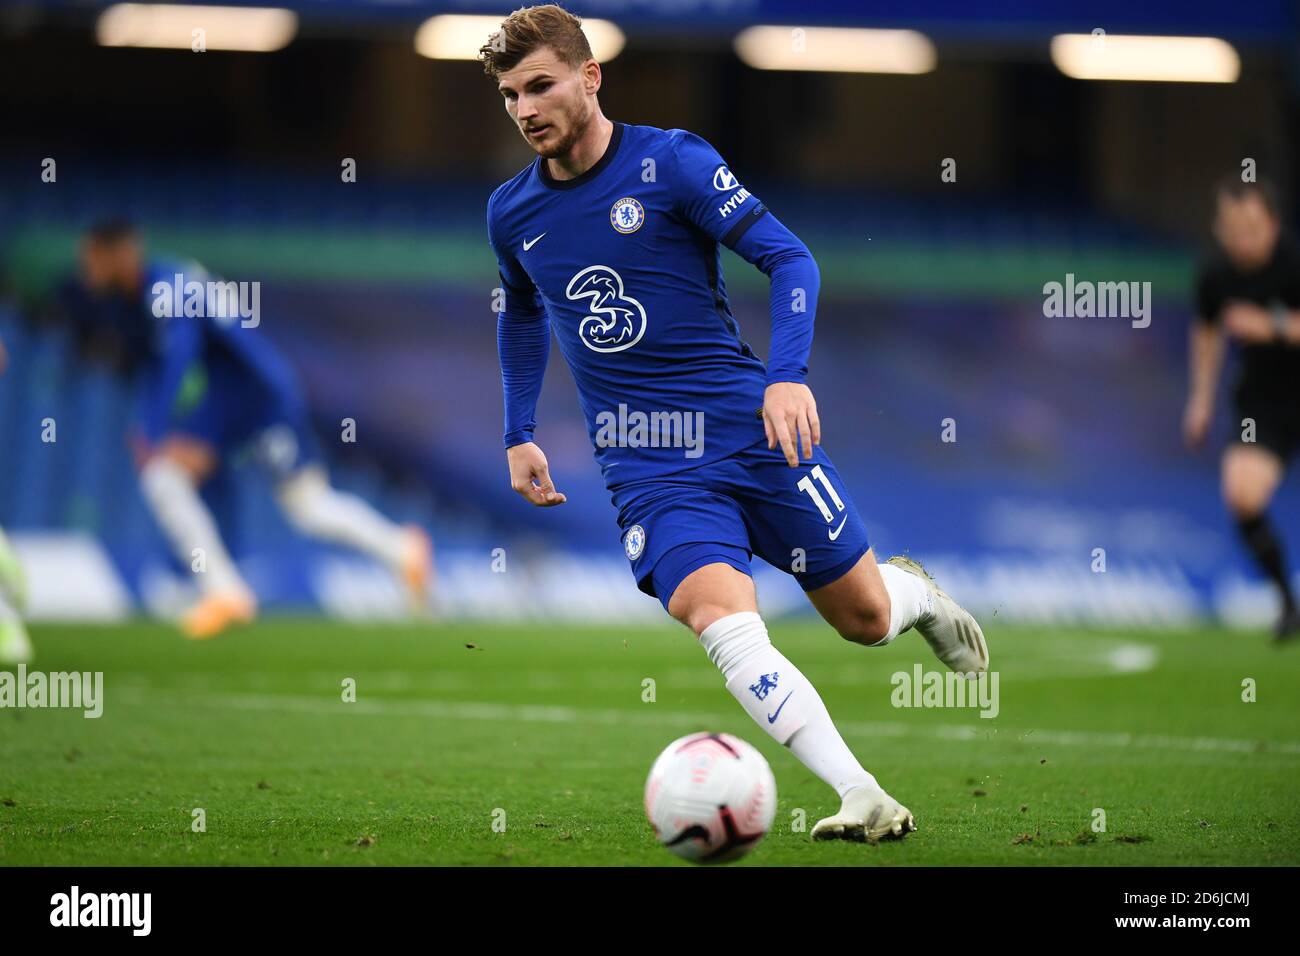 London, England, 17th Oct 2020  Timo Werner  Chelsea v Southampton.  Premier League. Credit : Mark Pain / Alamy Live News Stock Photo